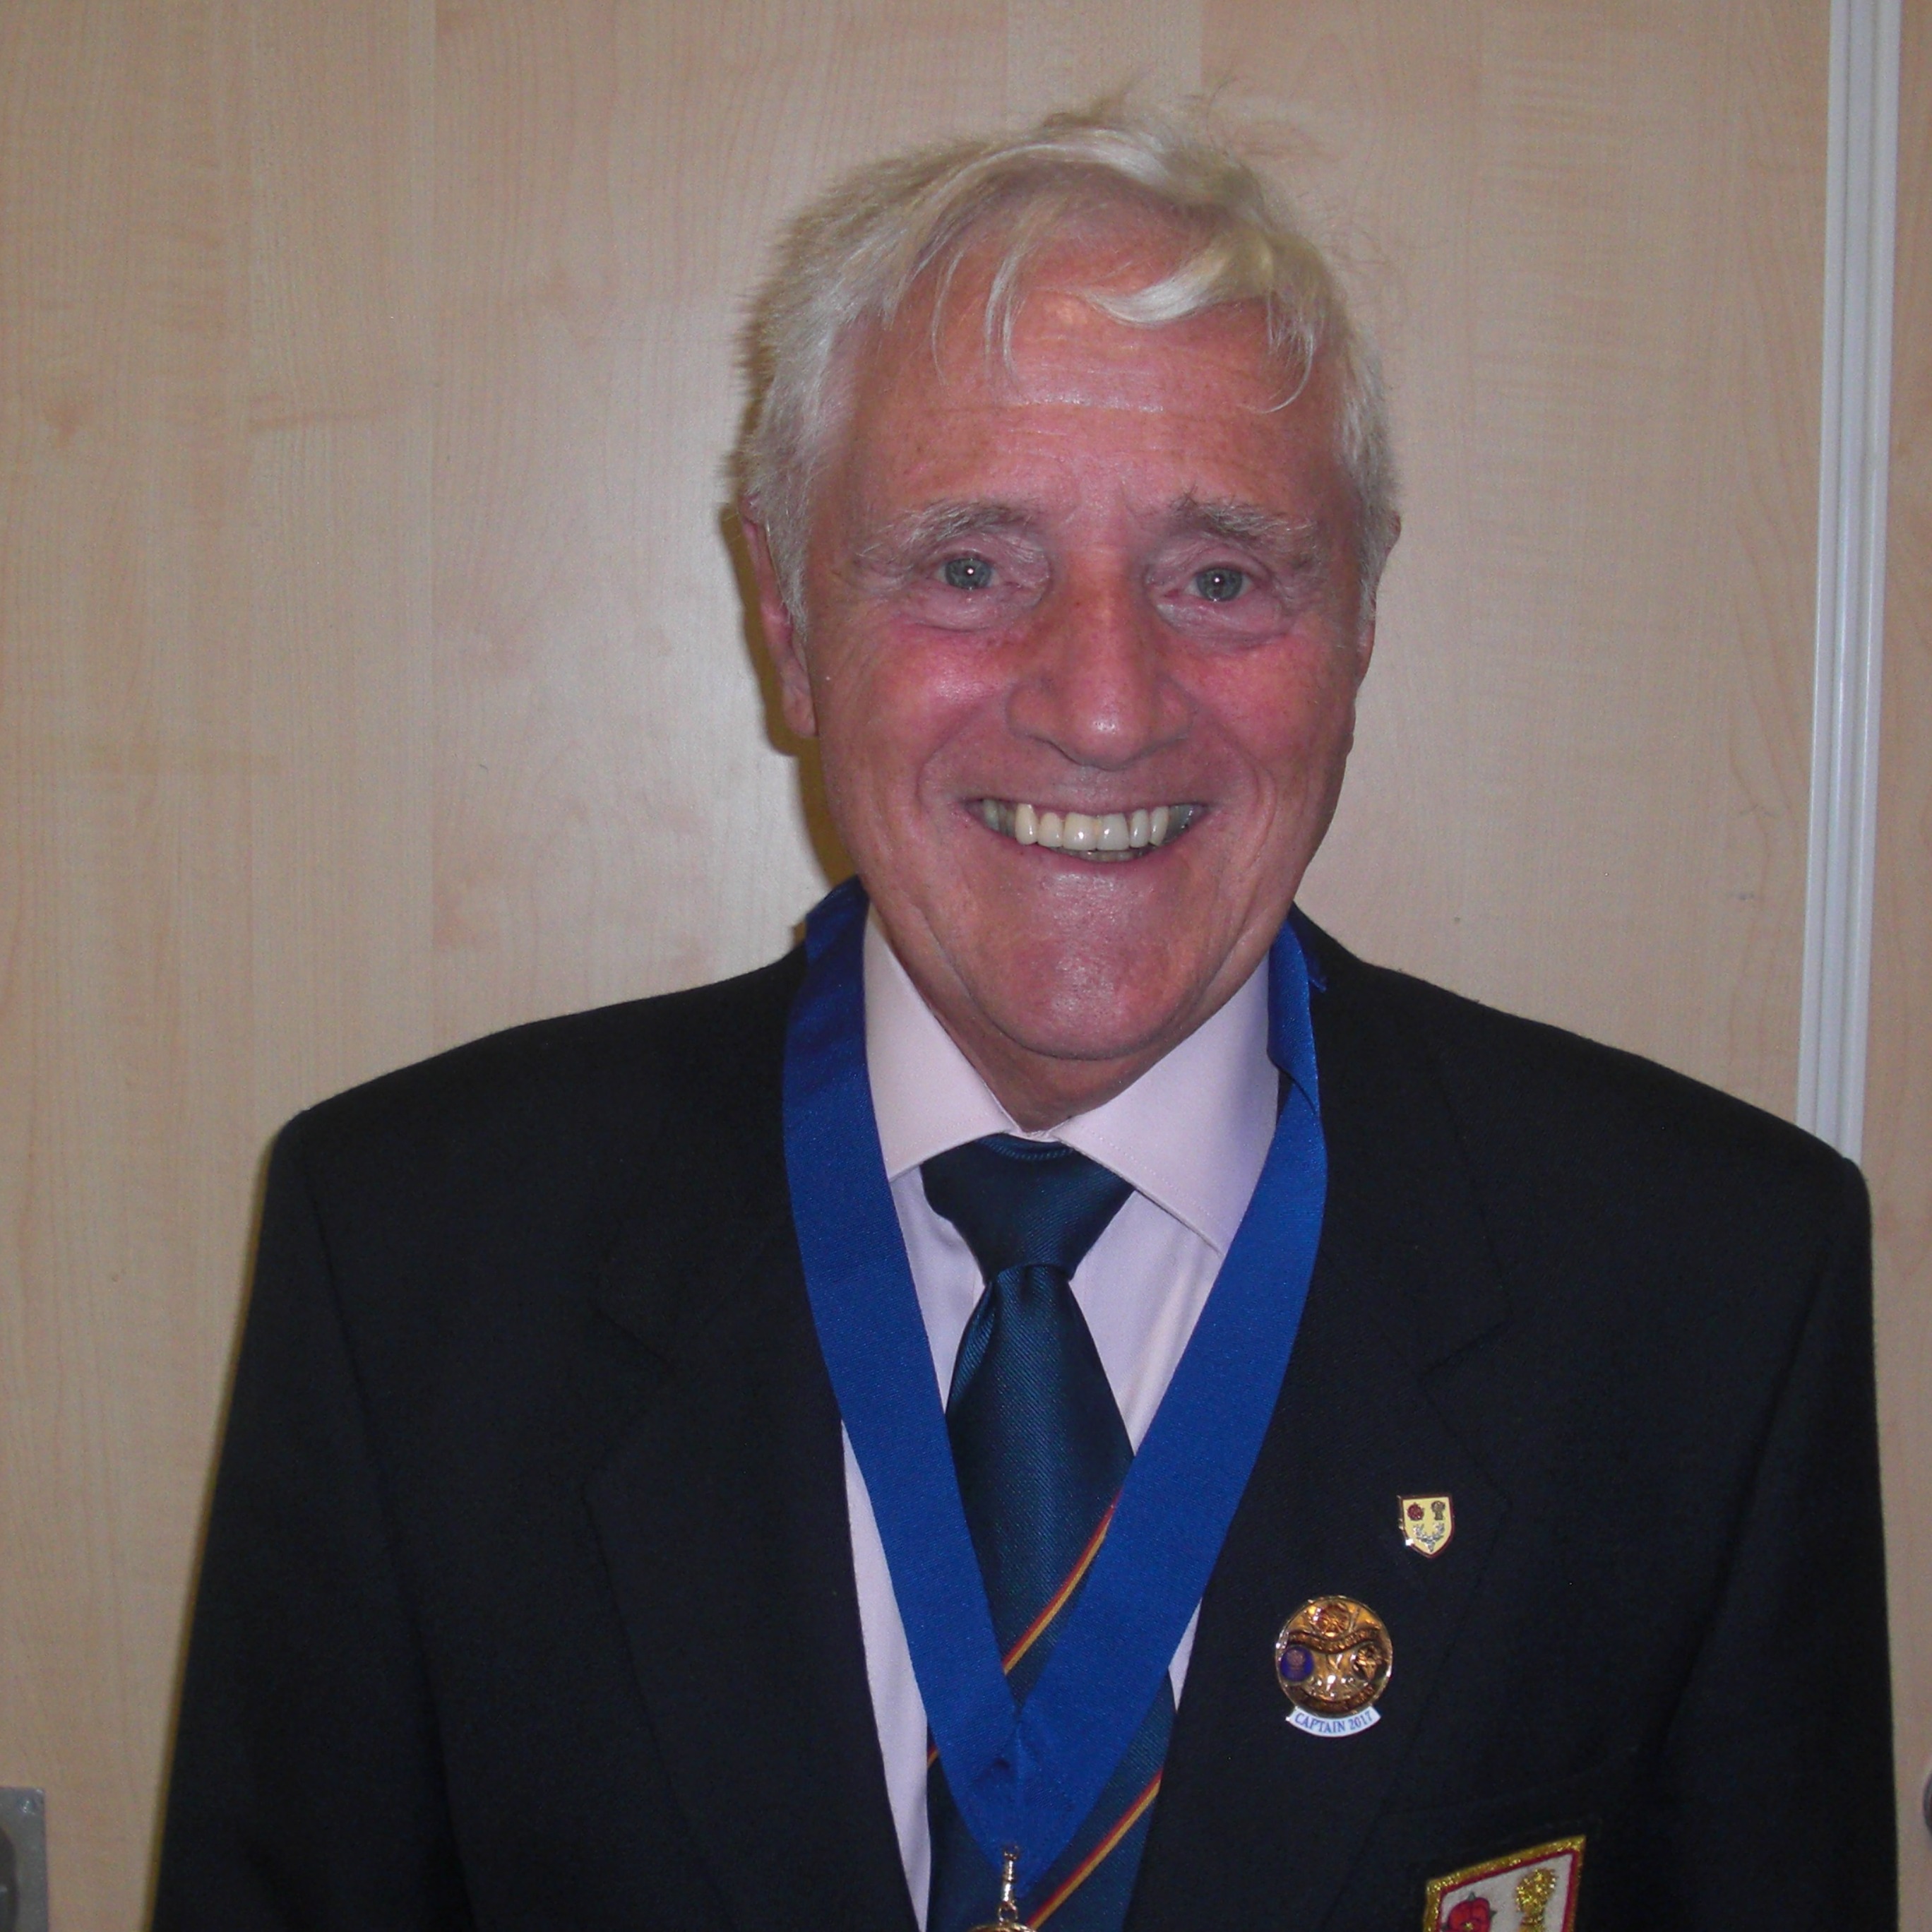 President - Geoff Sable (Whitefield)